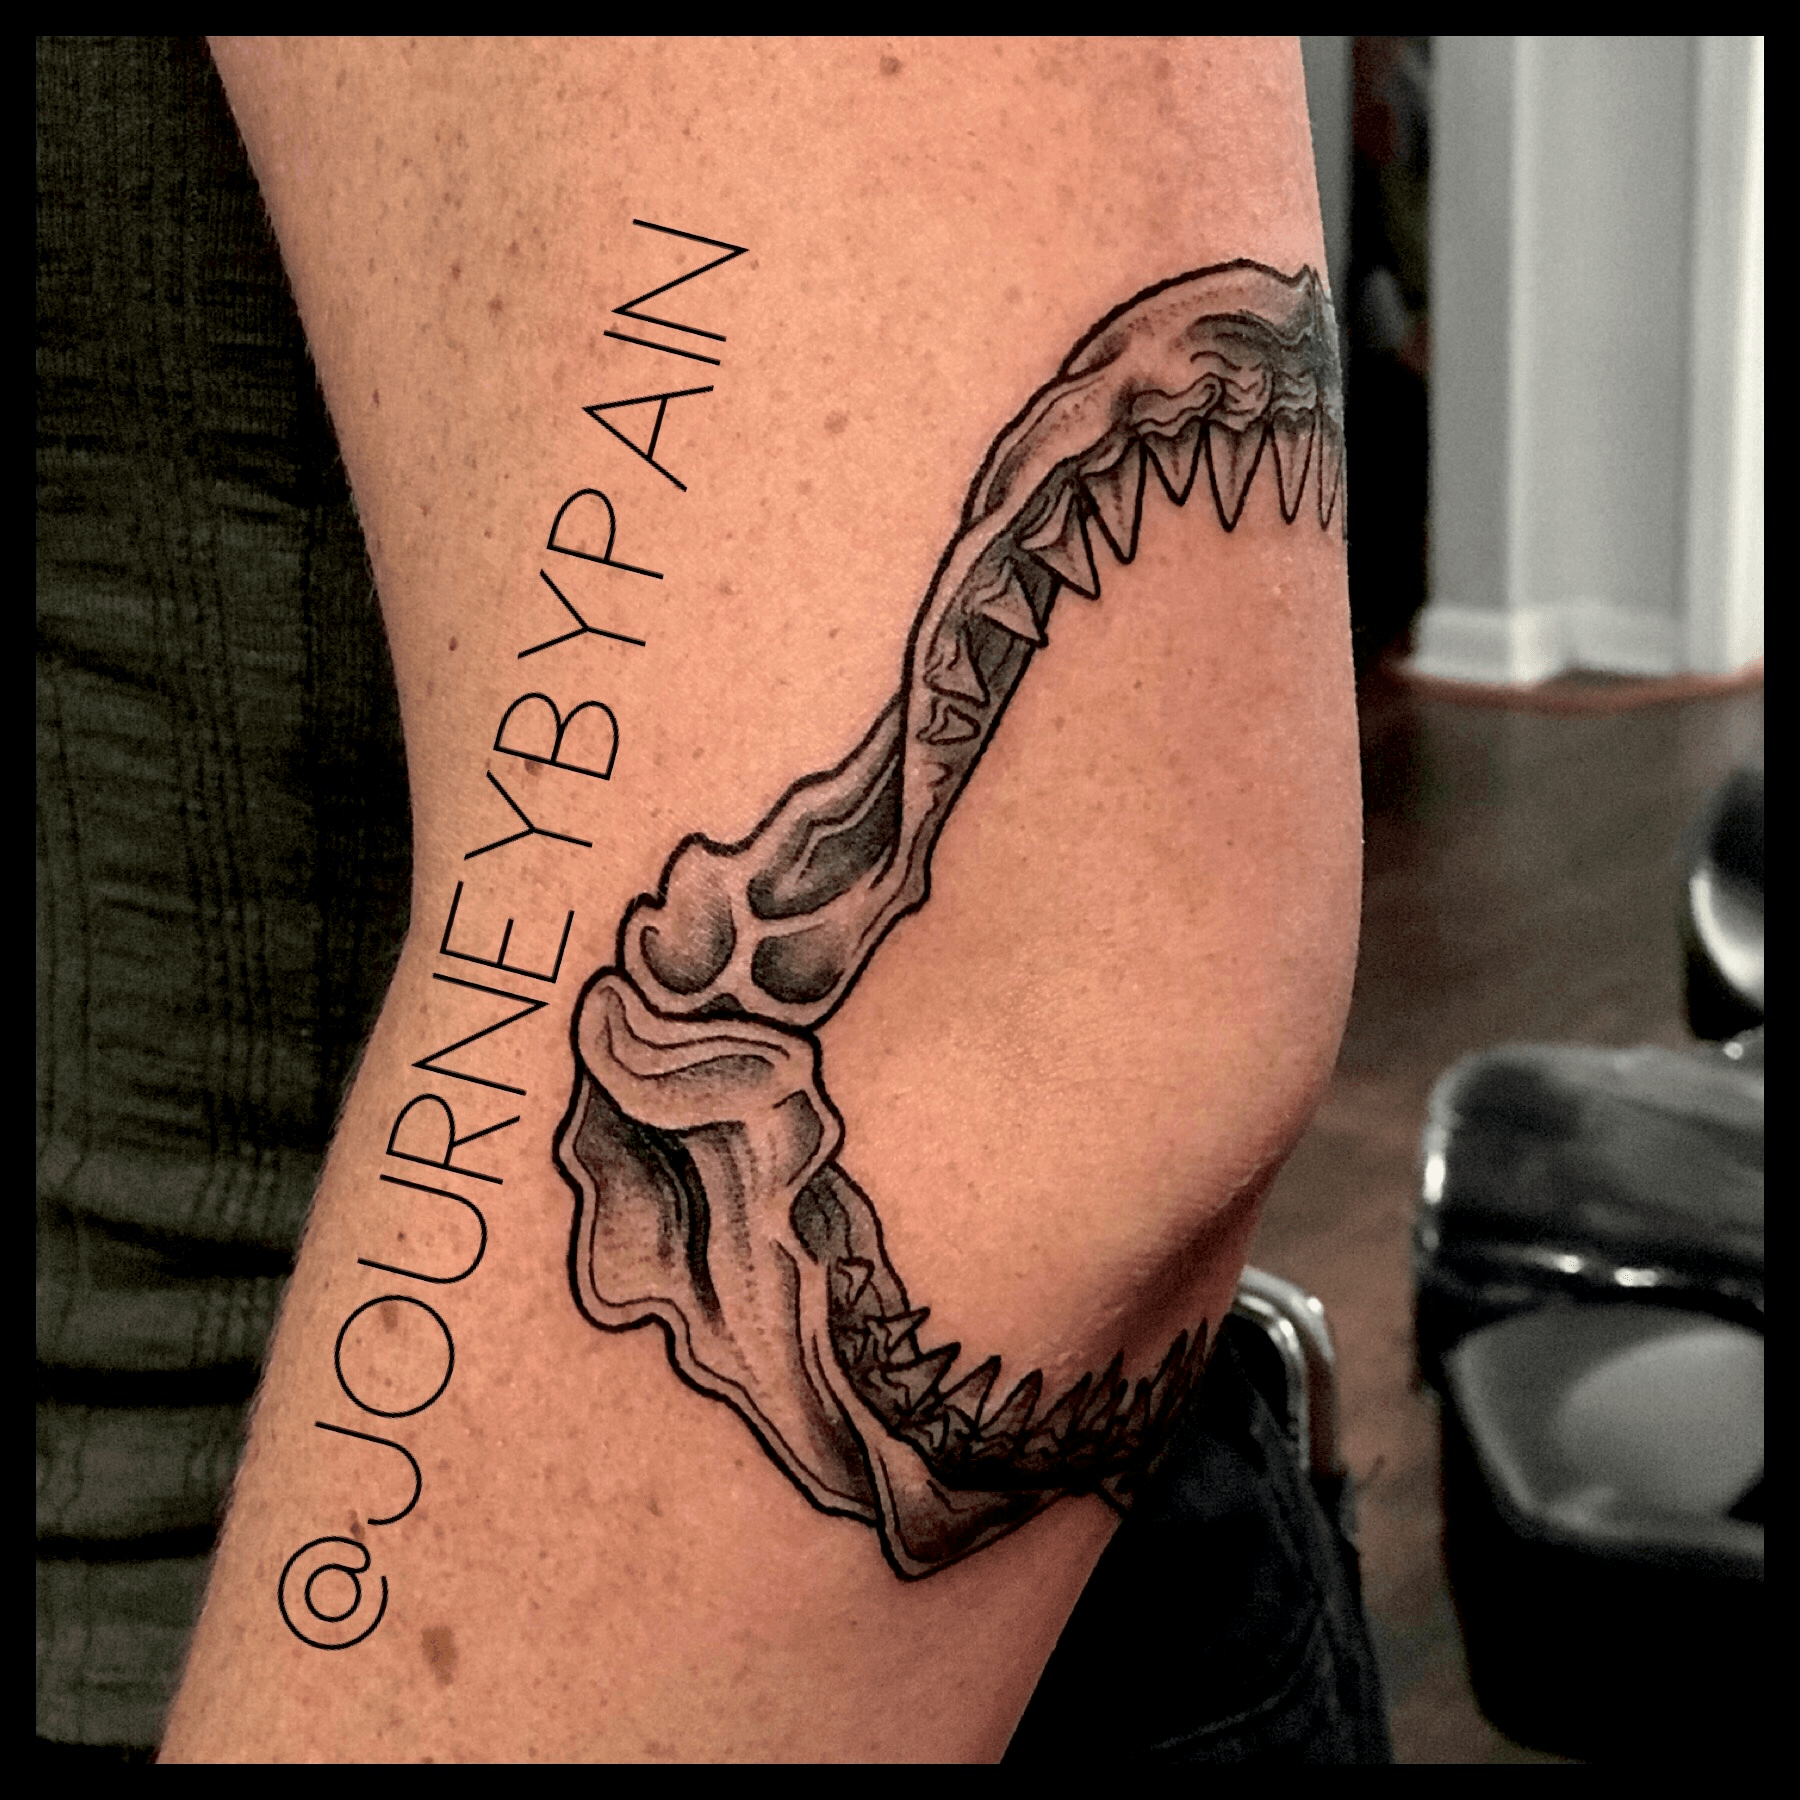 EK Chan  on Instagram two pieces from the weekend shark jaws in an  extra fun spot and a trilobite  crinoid ste  Shark tattoos Knee tattoo  Sleeve tattoos